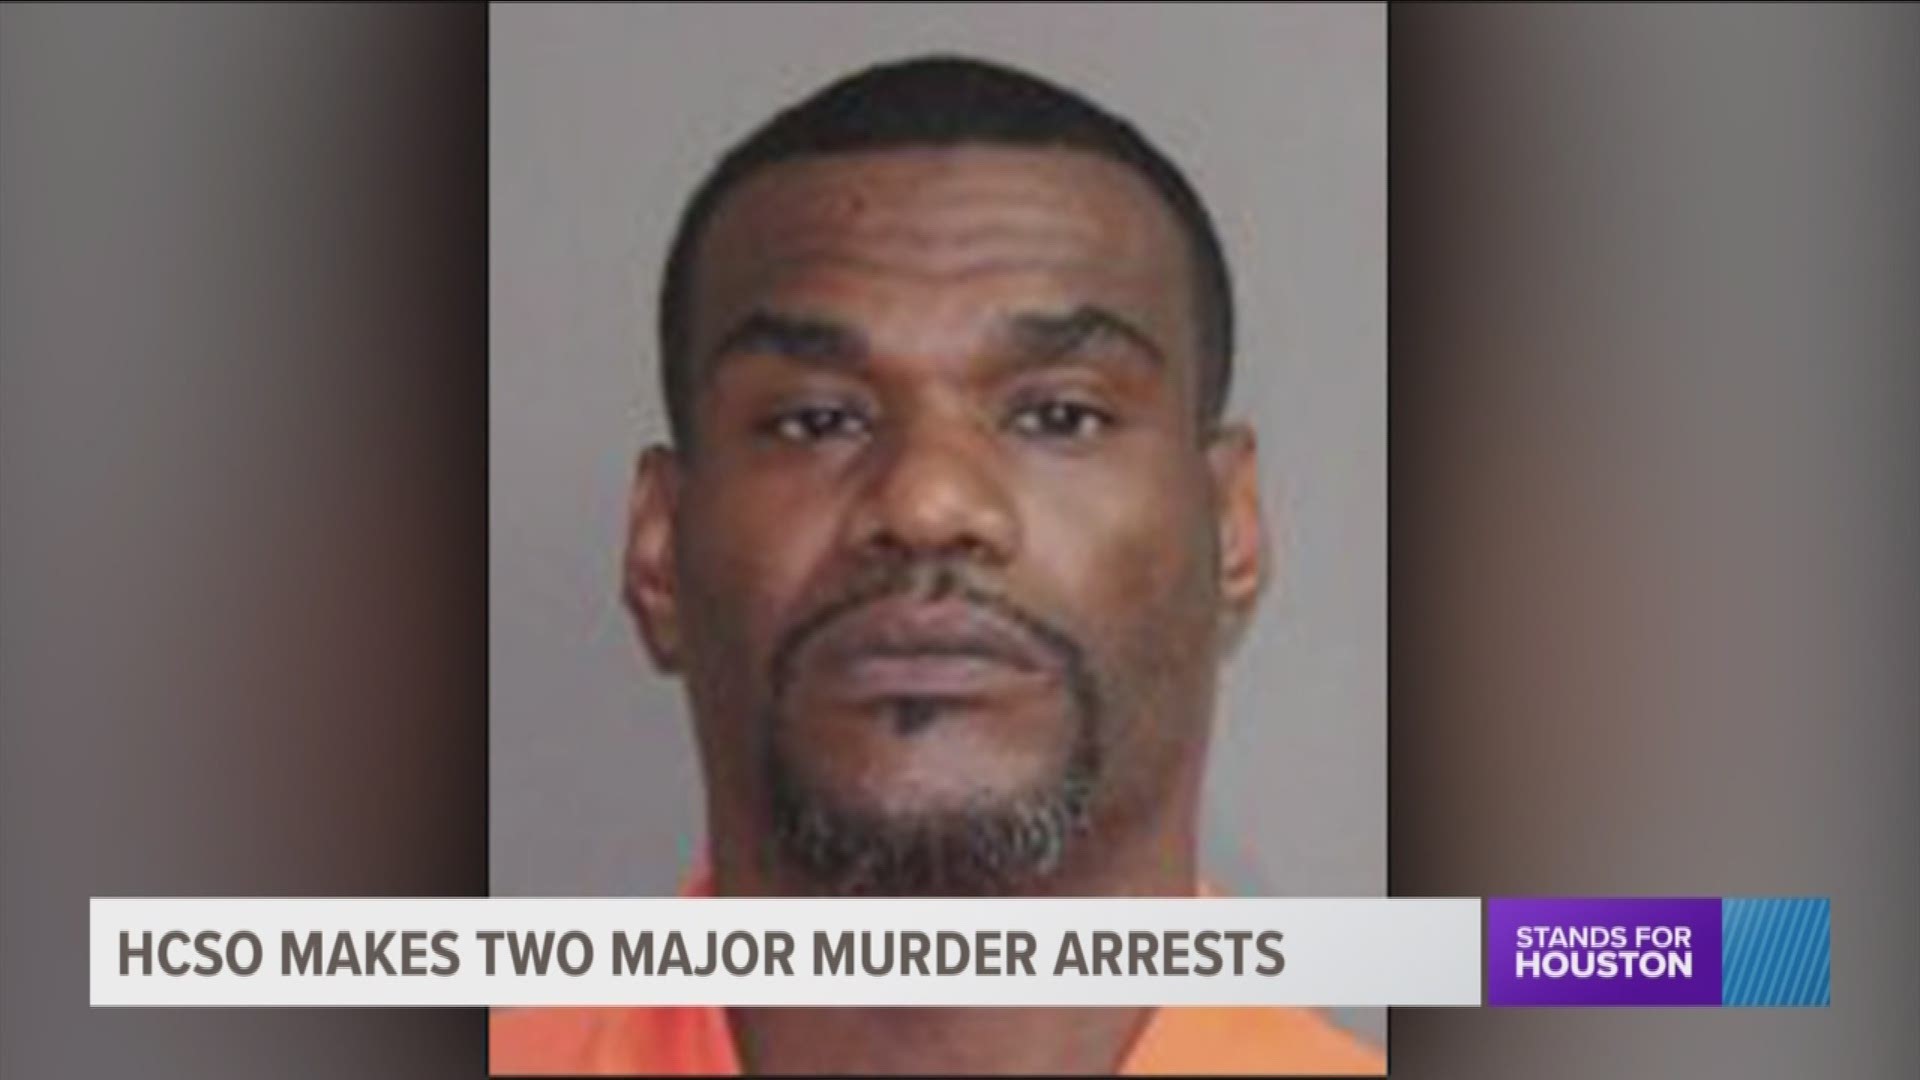 Harris County Sheriff's deputies made arrests in two separate murder cases Wednesday morning.